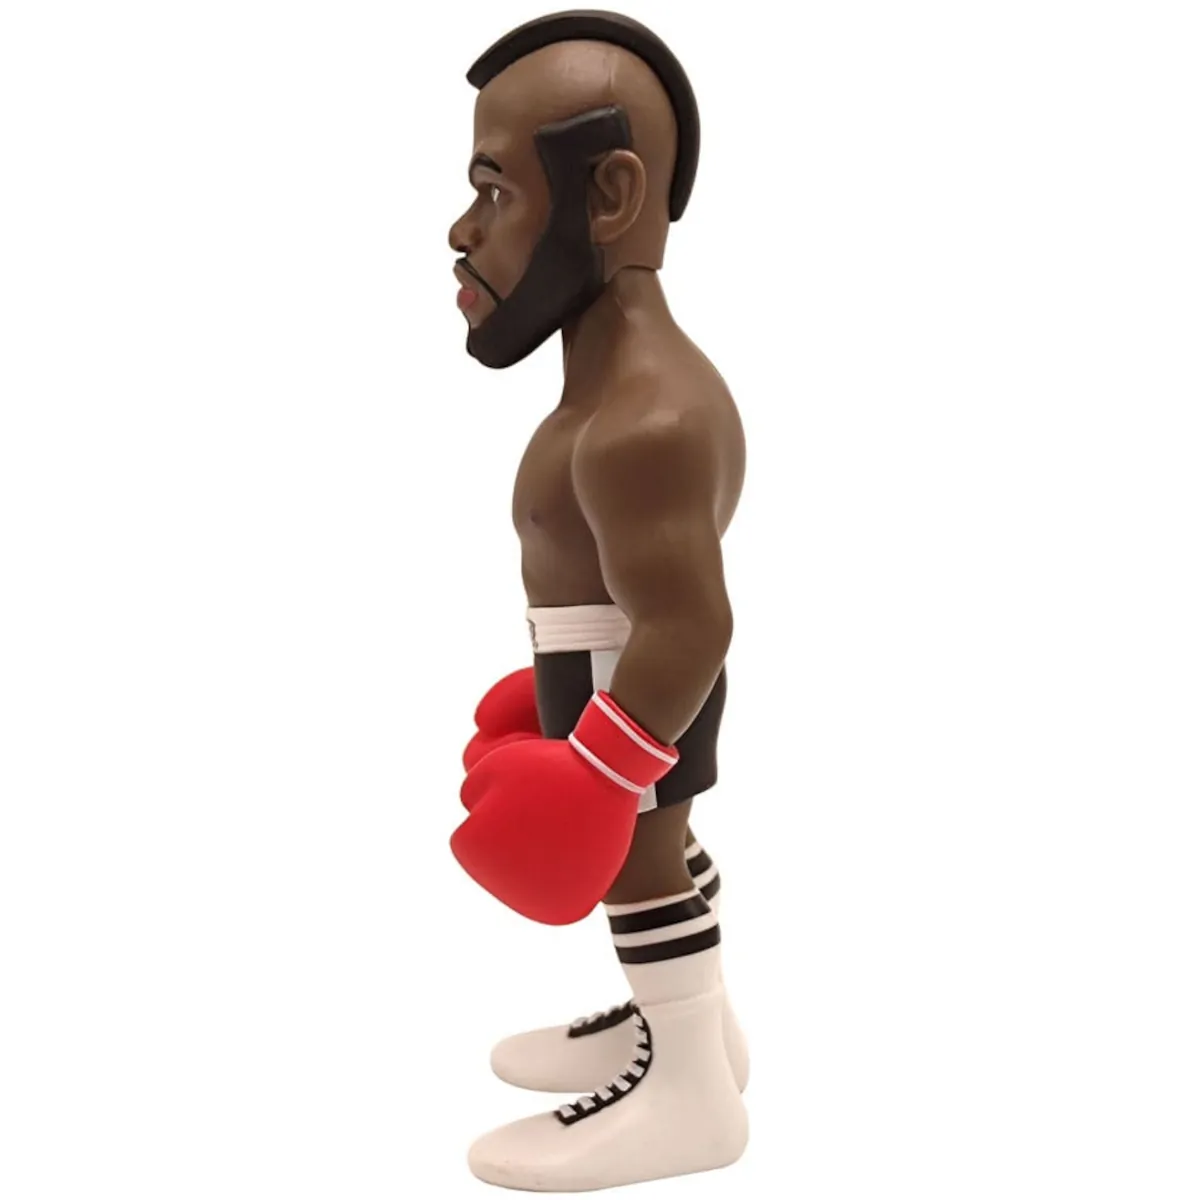 MN11681 Clubber Lang (Rocky) 12cm MINIX Collectable Figure 2